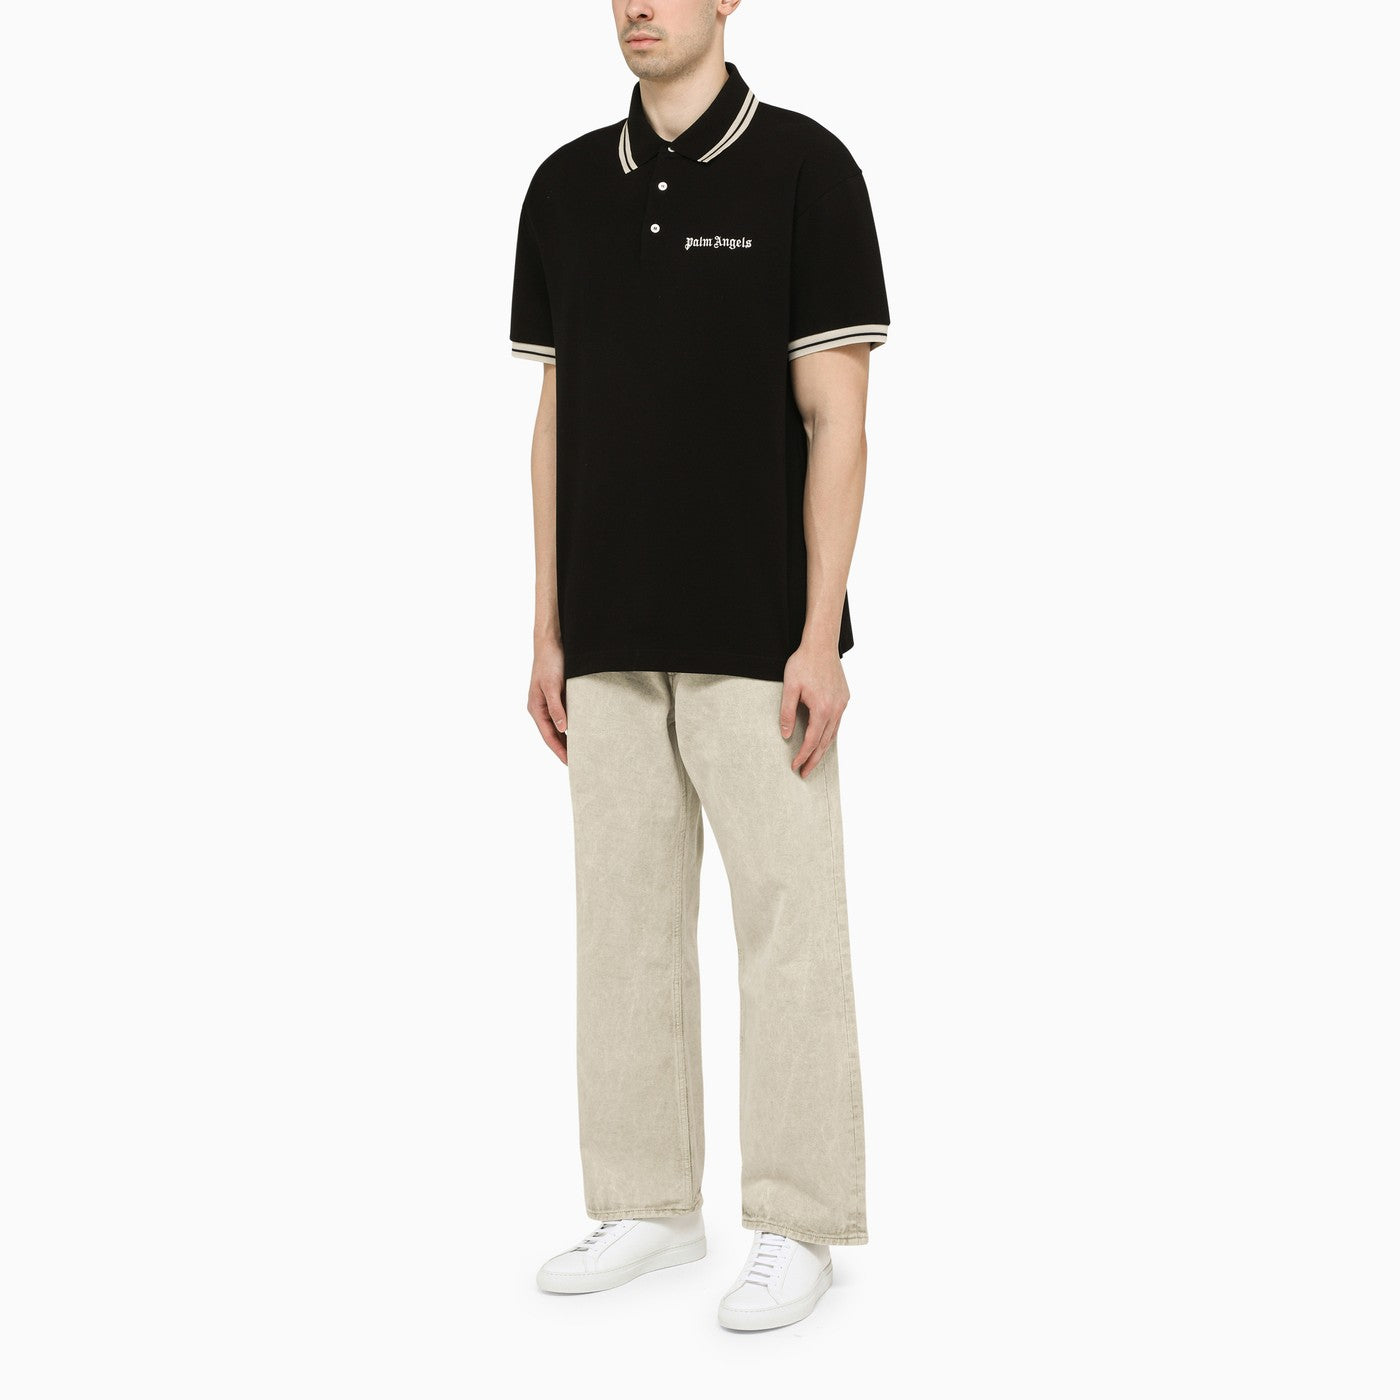 Palm Angels Embroidered Palm Angels Polo Black/White